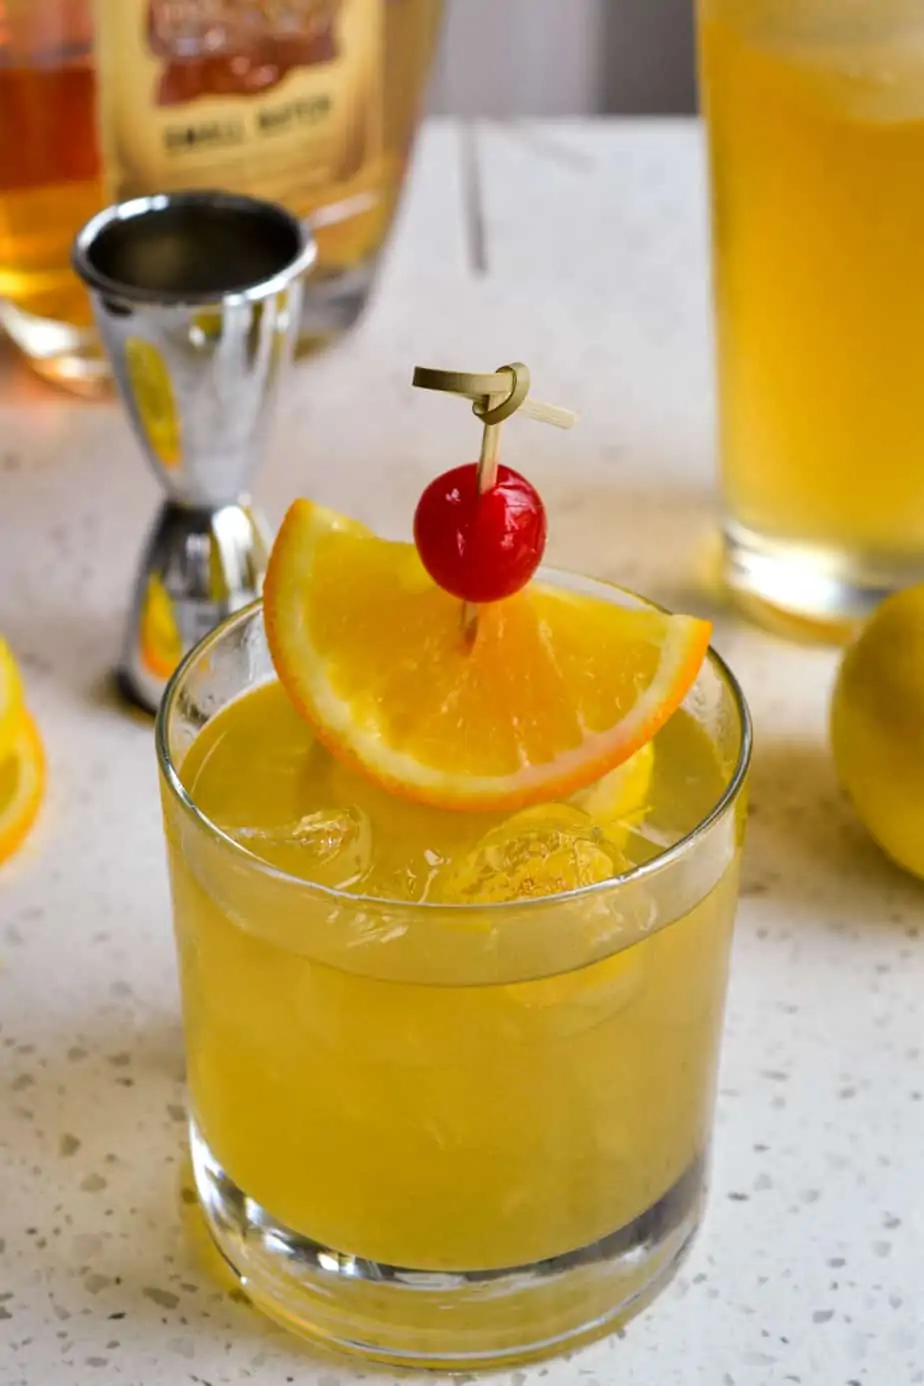 Ice cold whiskey sour over ice with a garnish